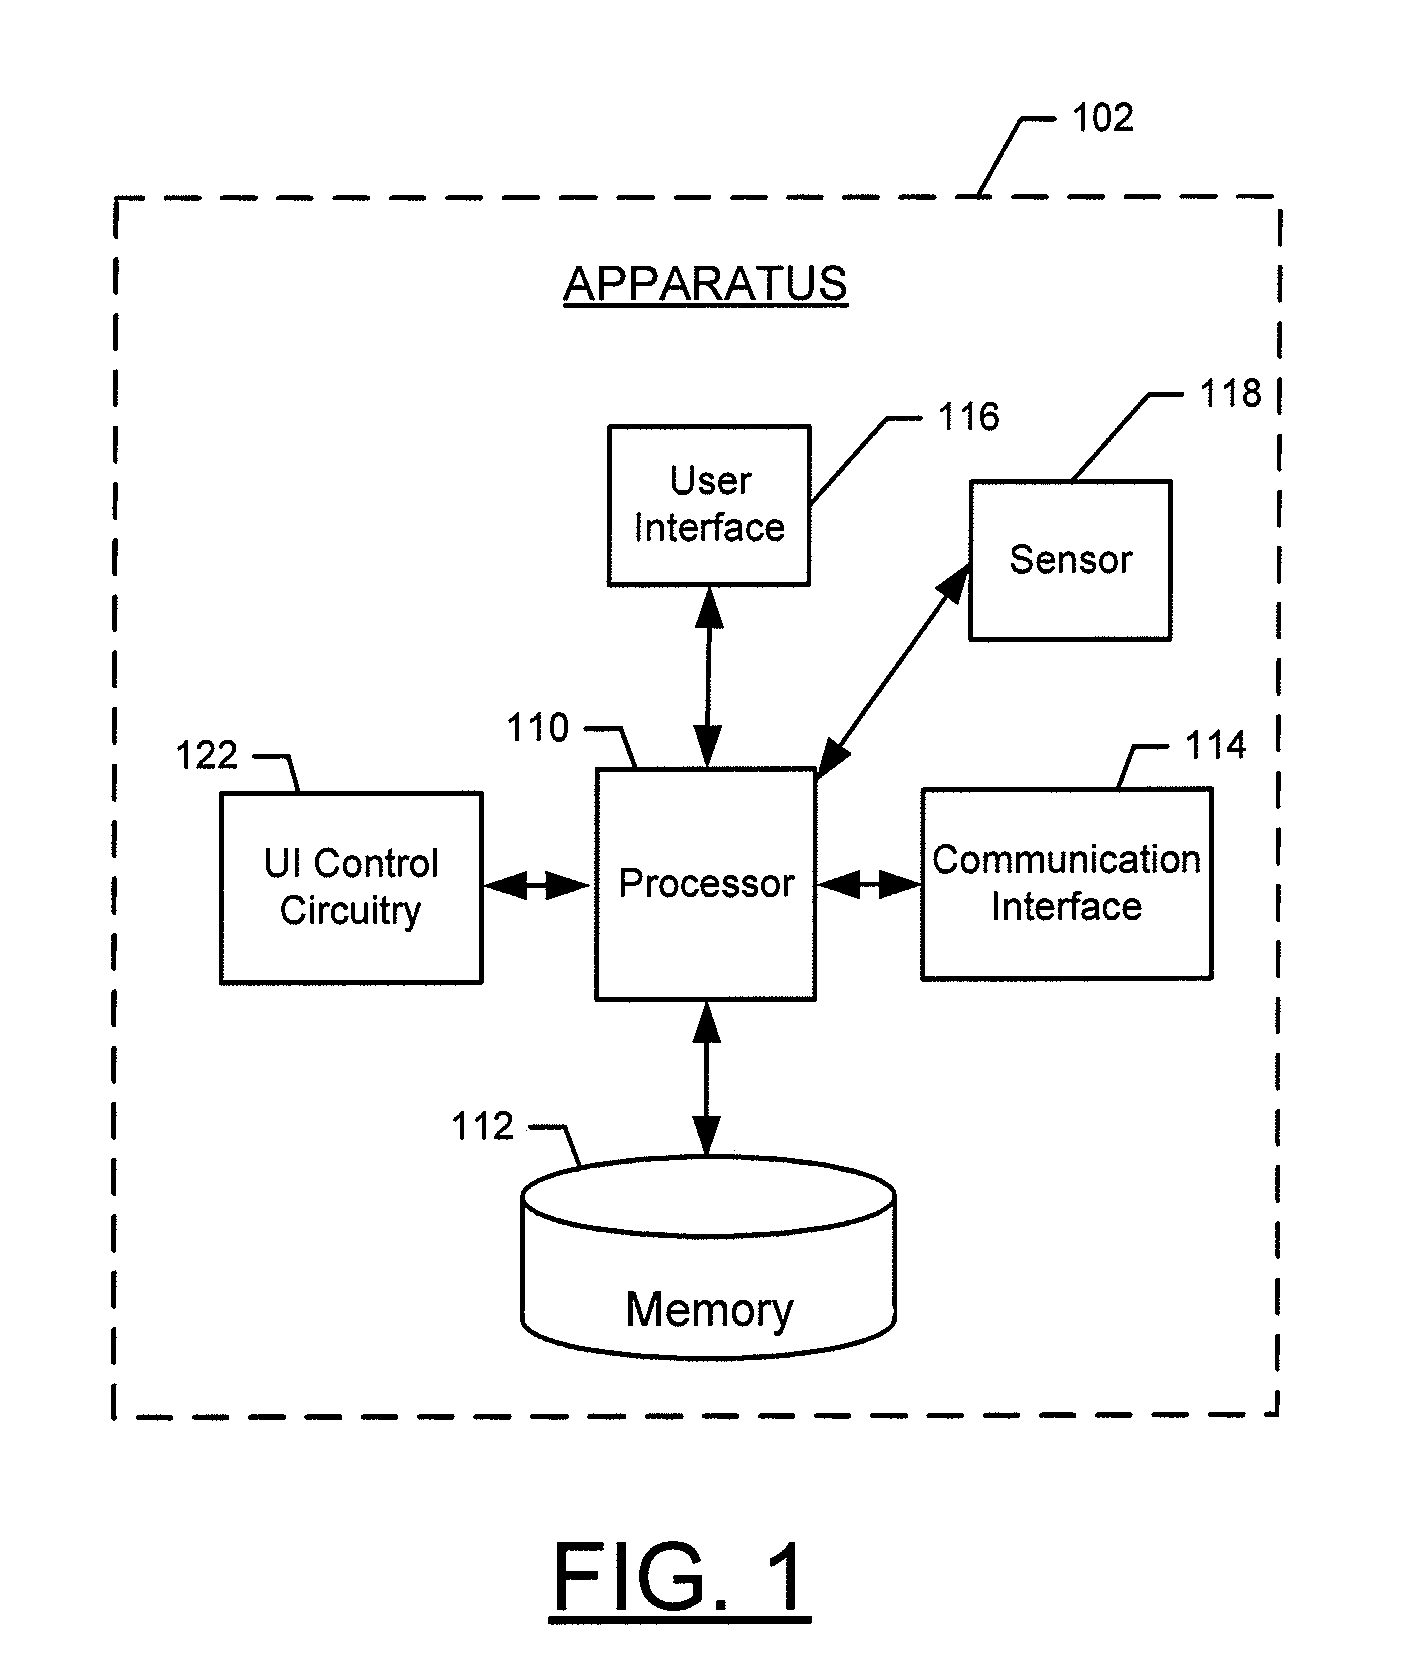 Methods, apparatuses, and computer program products for saving and resuming a state of a collaborative interaction session between devices based on their positional relationship